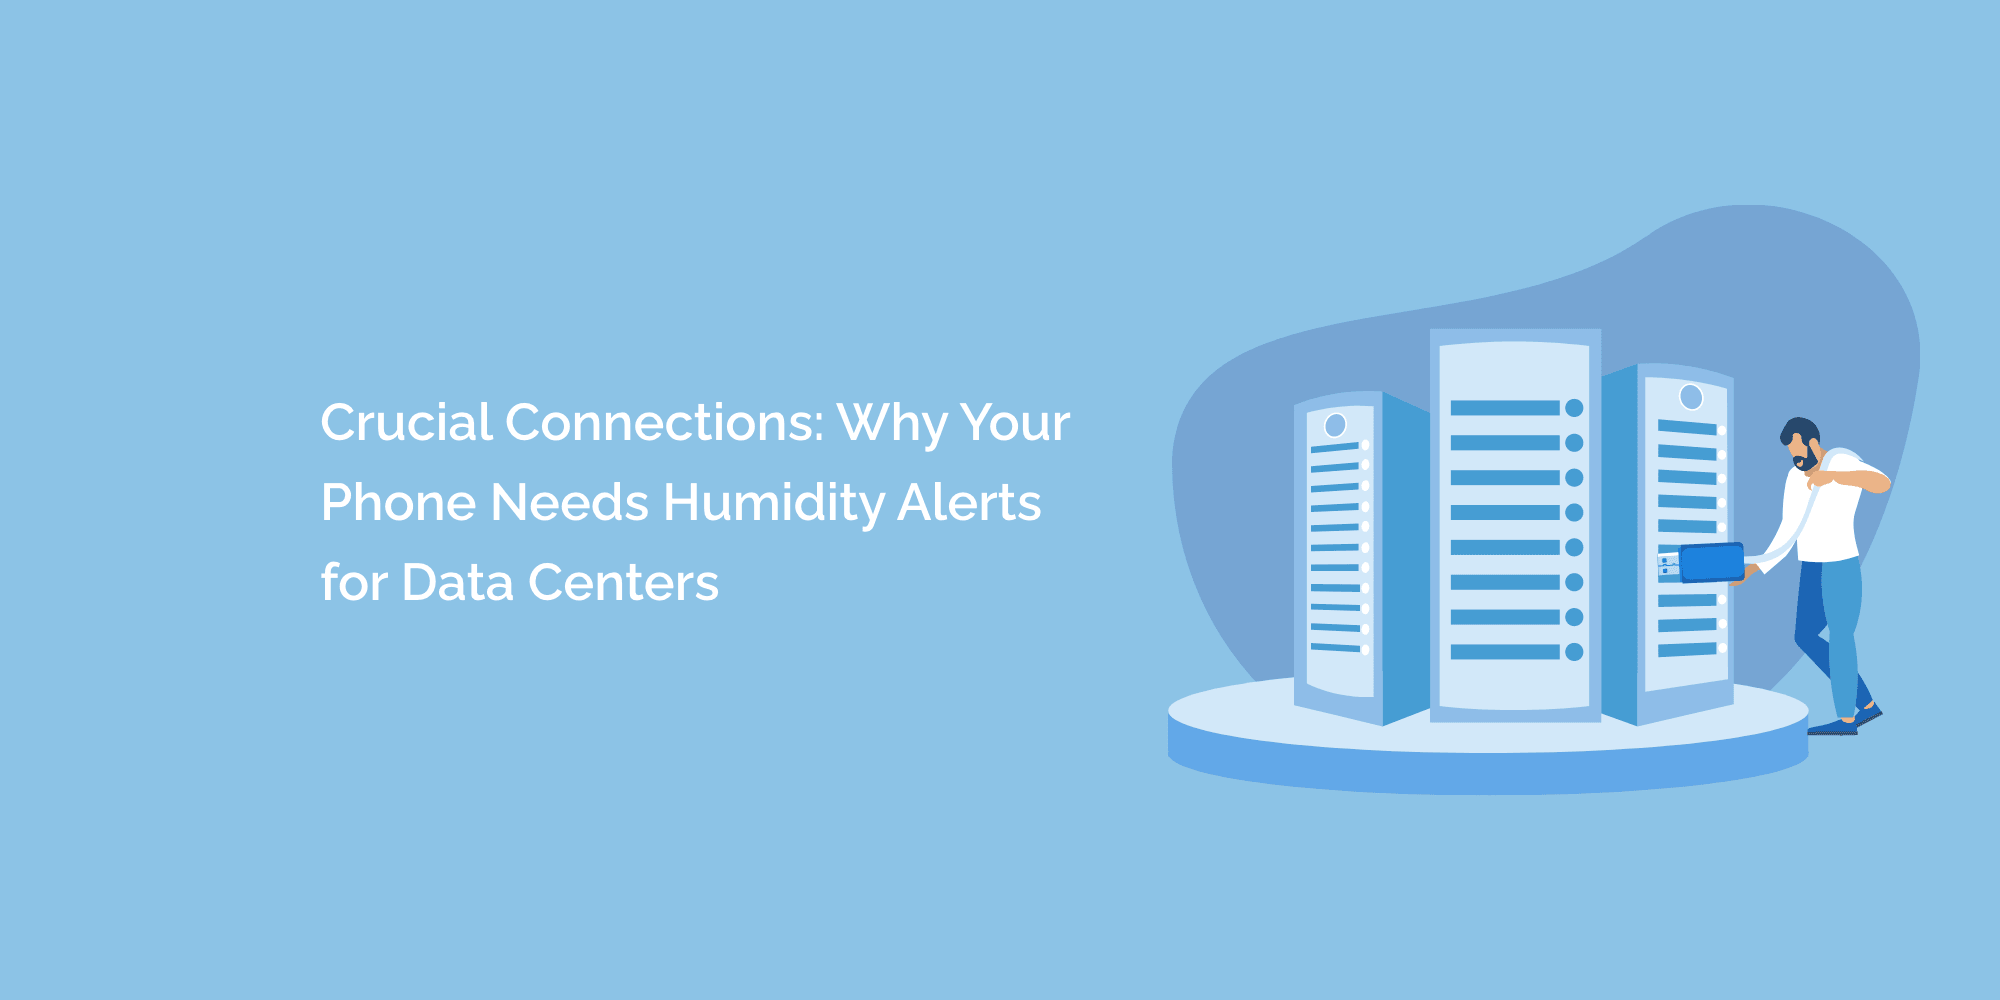 Crucial Connections: Why Your Phone Needs Humidity Alerts for Data Centers